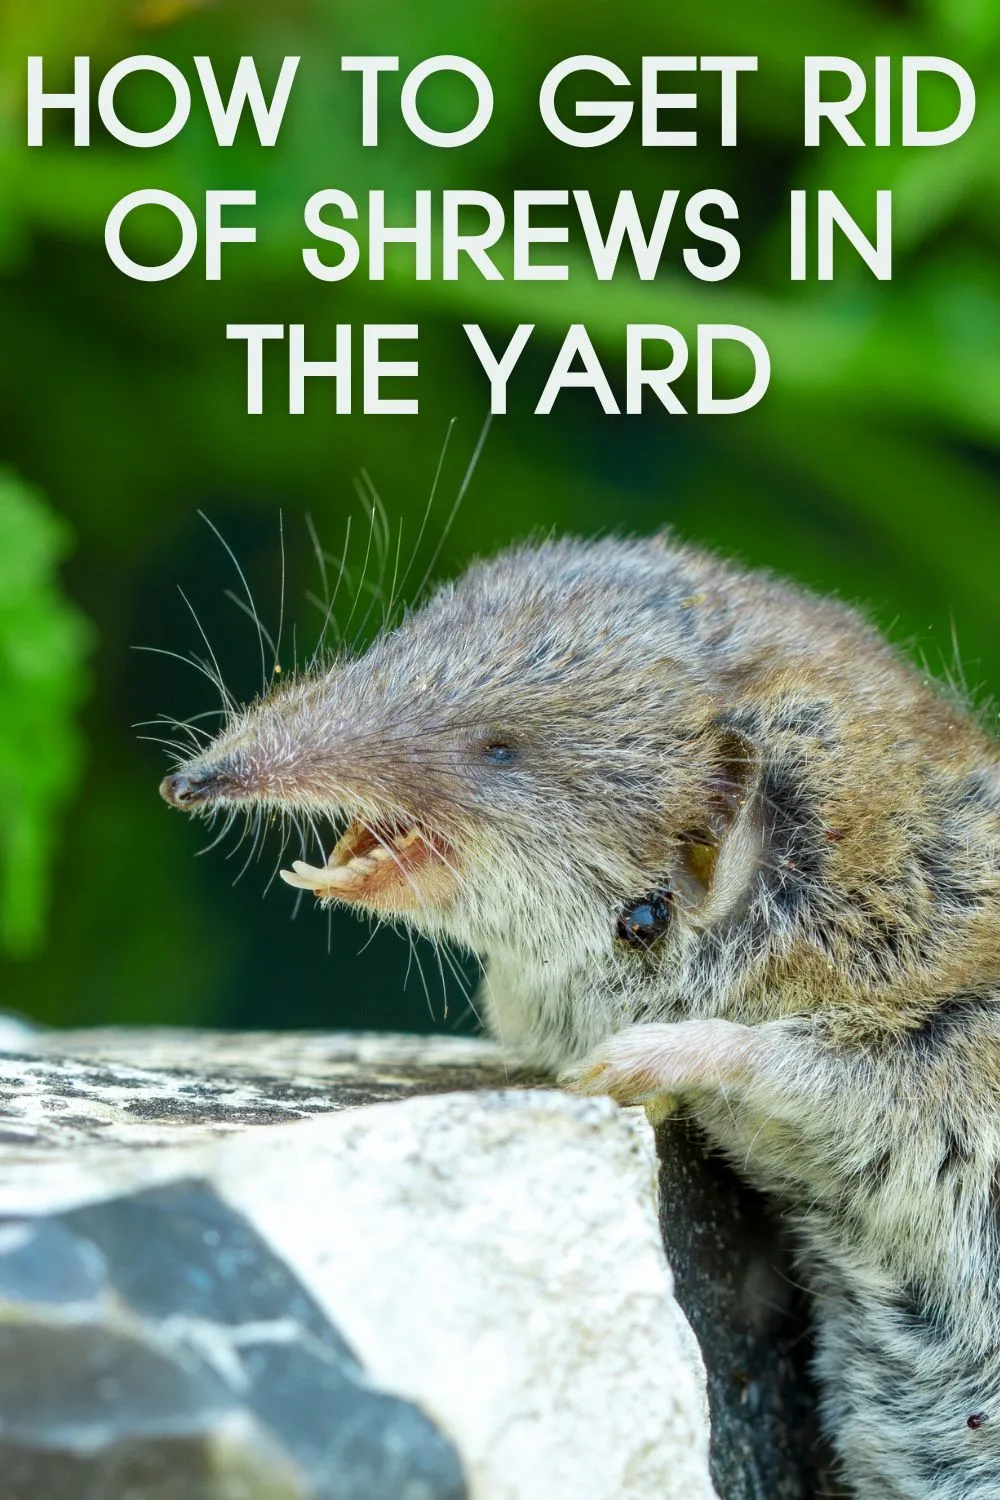 How to get rid of shrews in the yard.